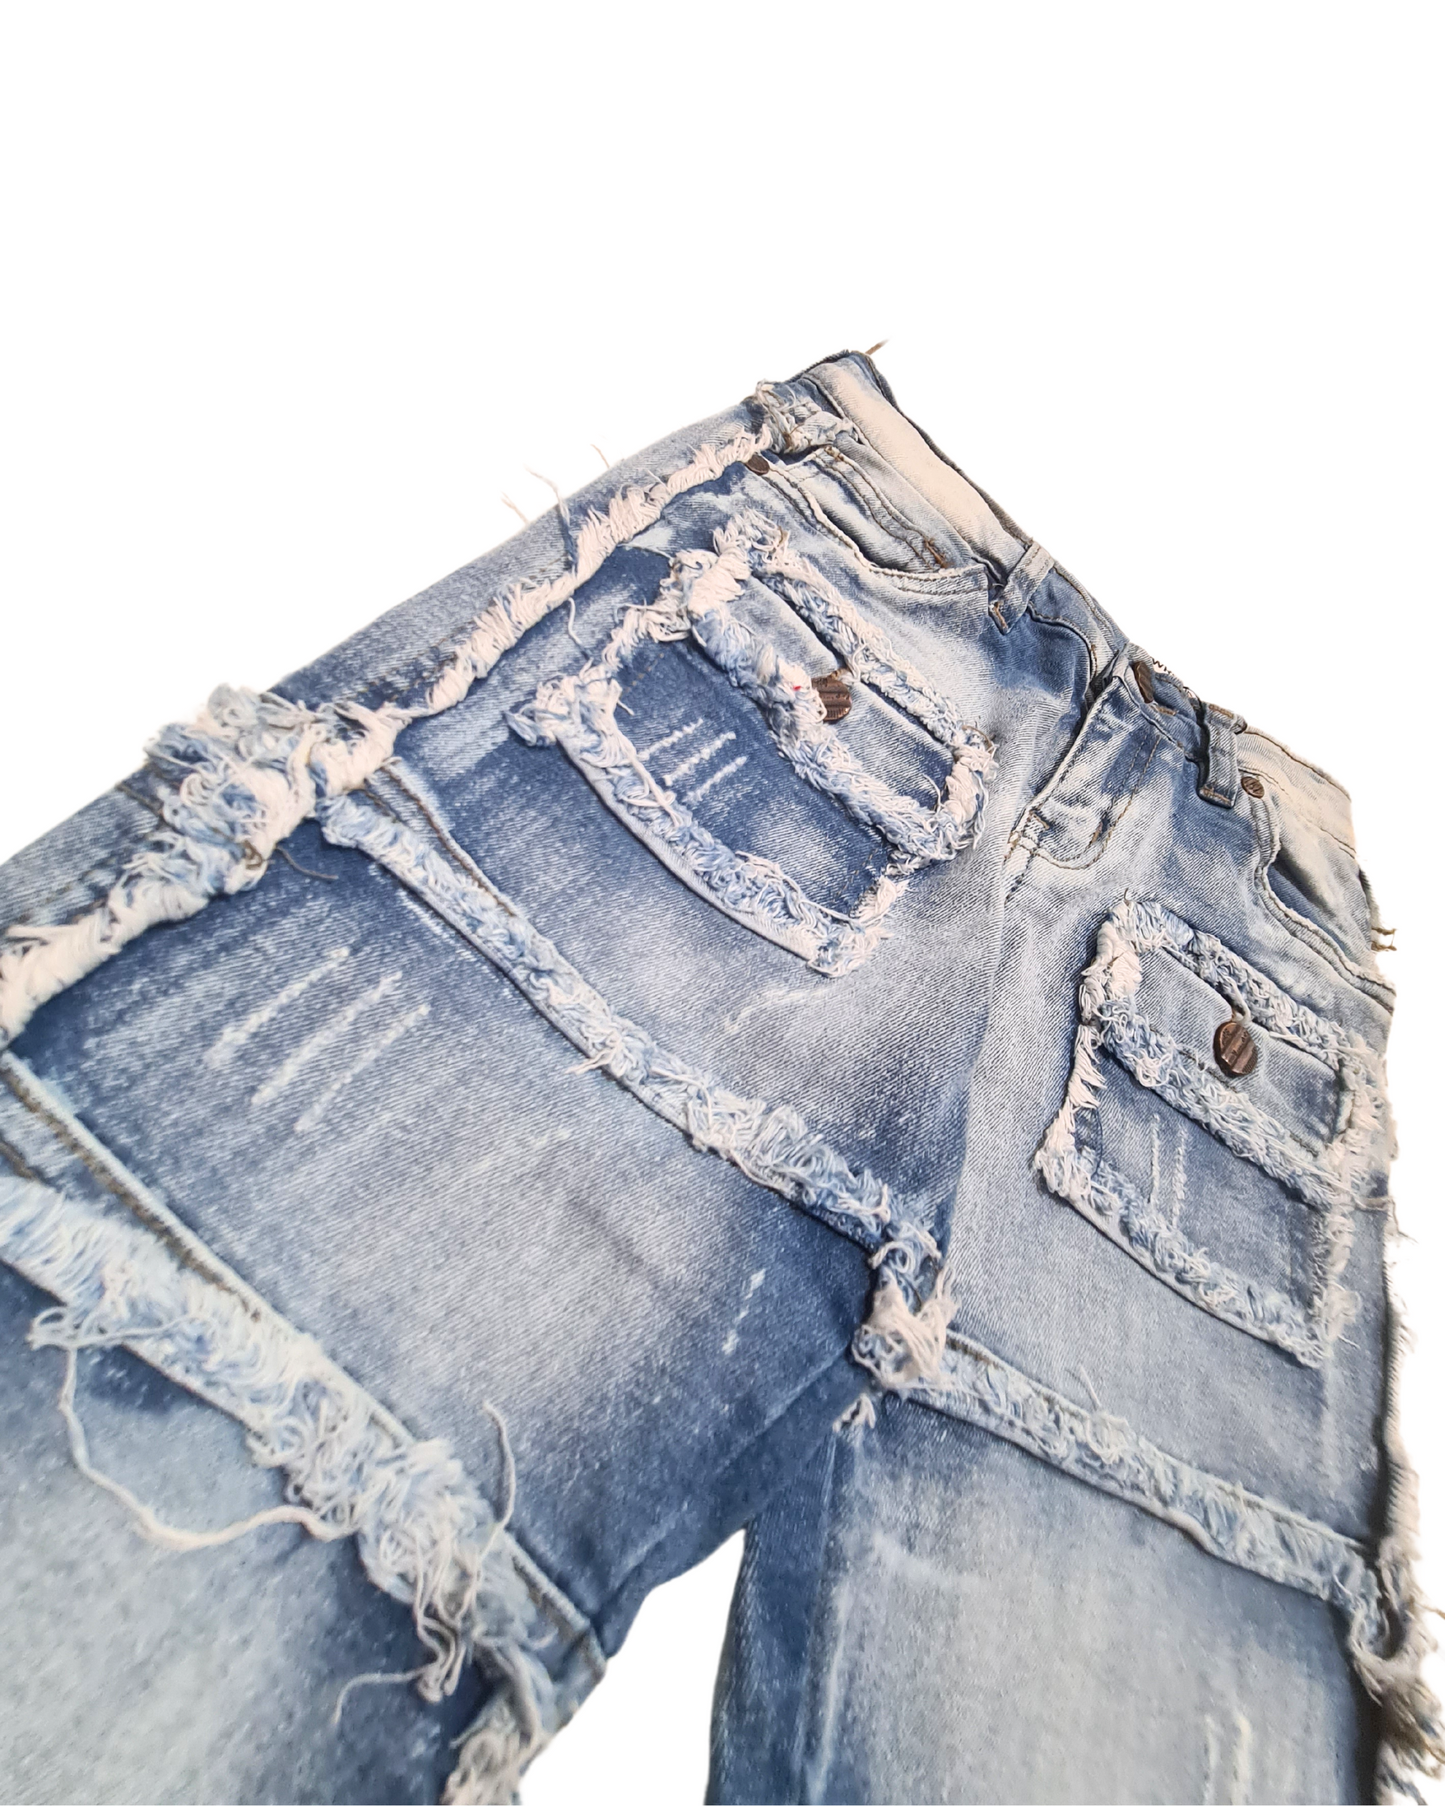 Kids Patchwork Stacked Jeans 33958K